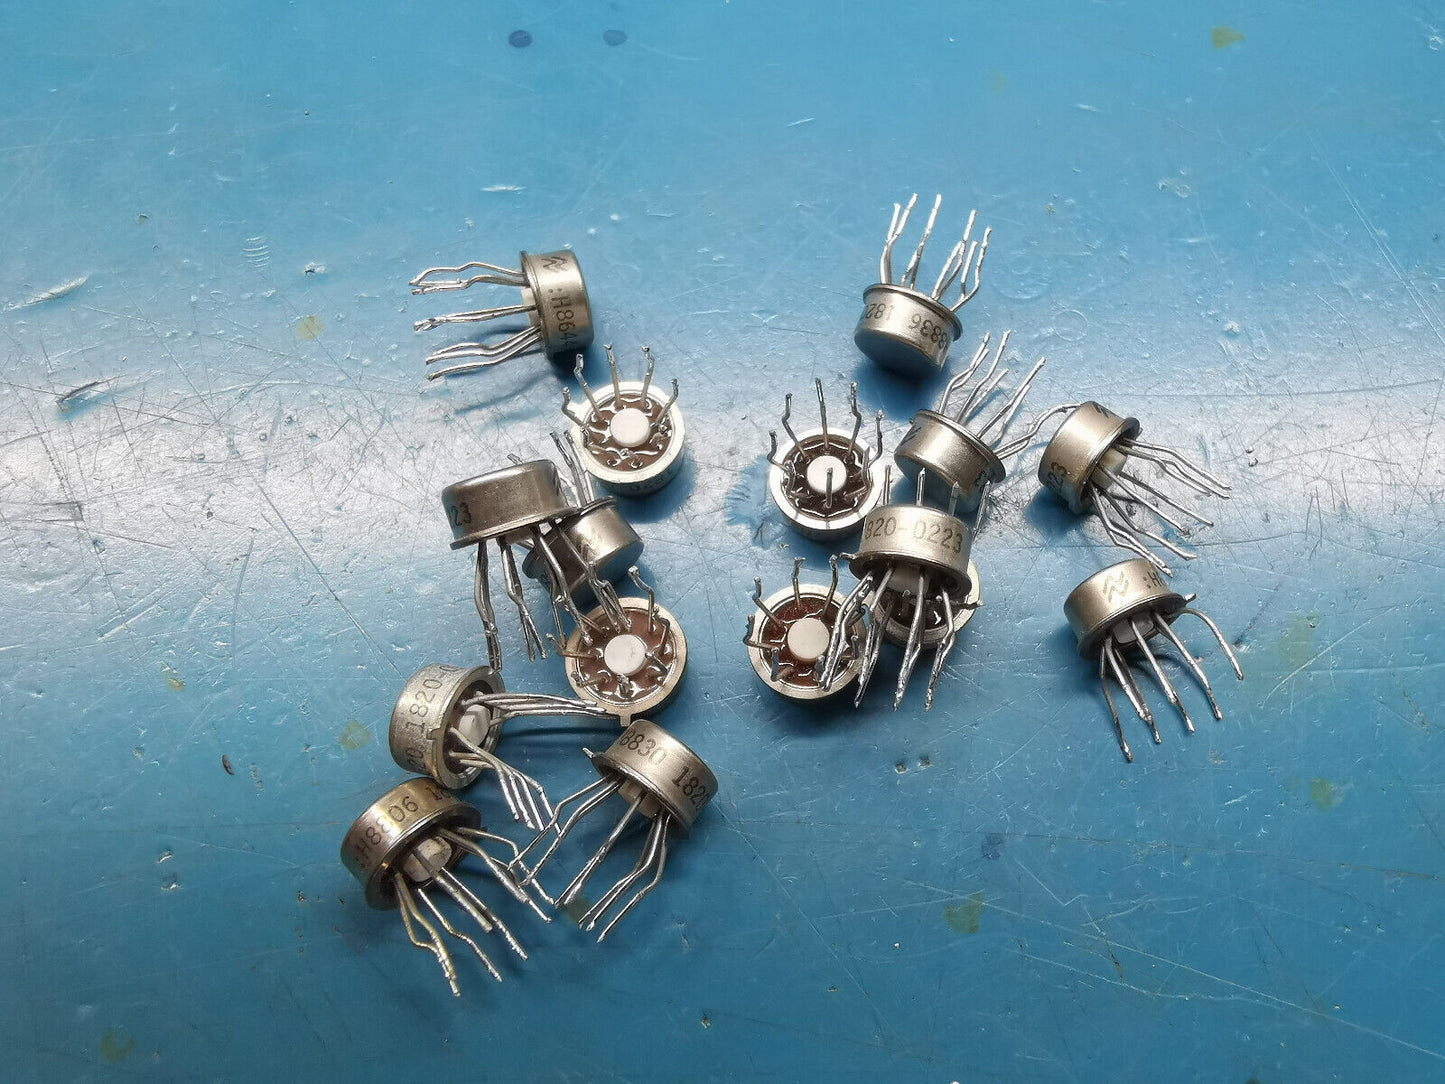 16pcs LM301AH Operational Amplifier TO-99  HP Agilent Part Number 1820-0223